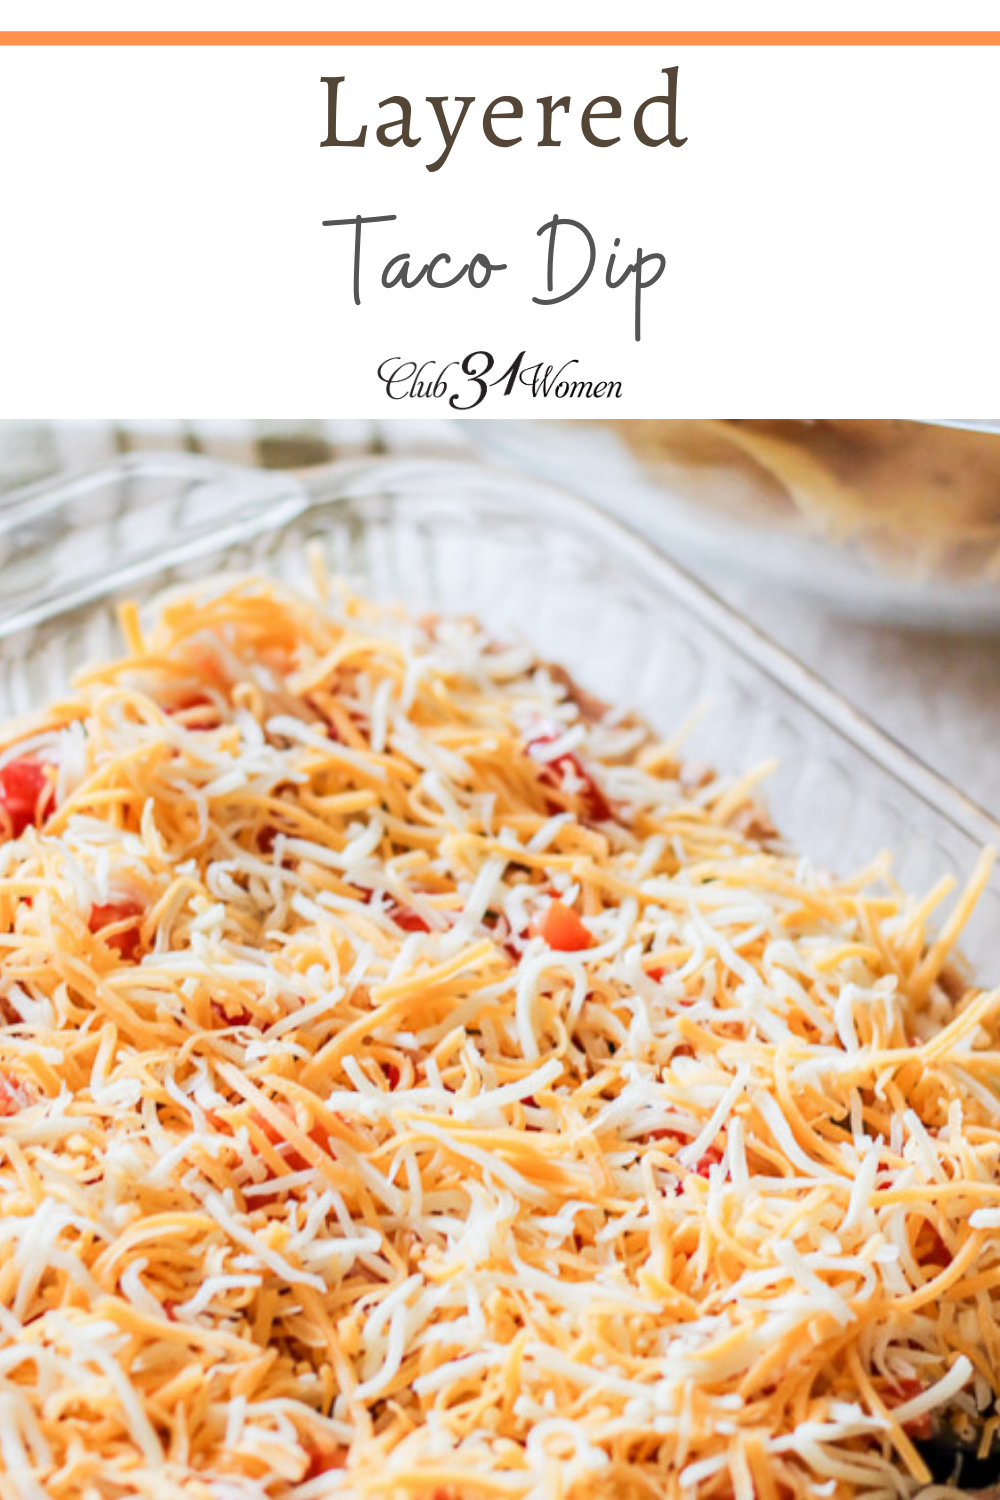 This dish is perfect for potlucks, baby showers, taco nights, movie nights. It's little to no work at all--and always a hit on whatever table it's placed! via @Club31Women